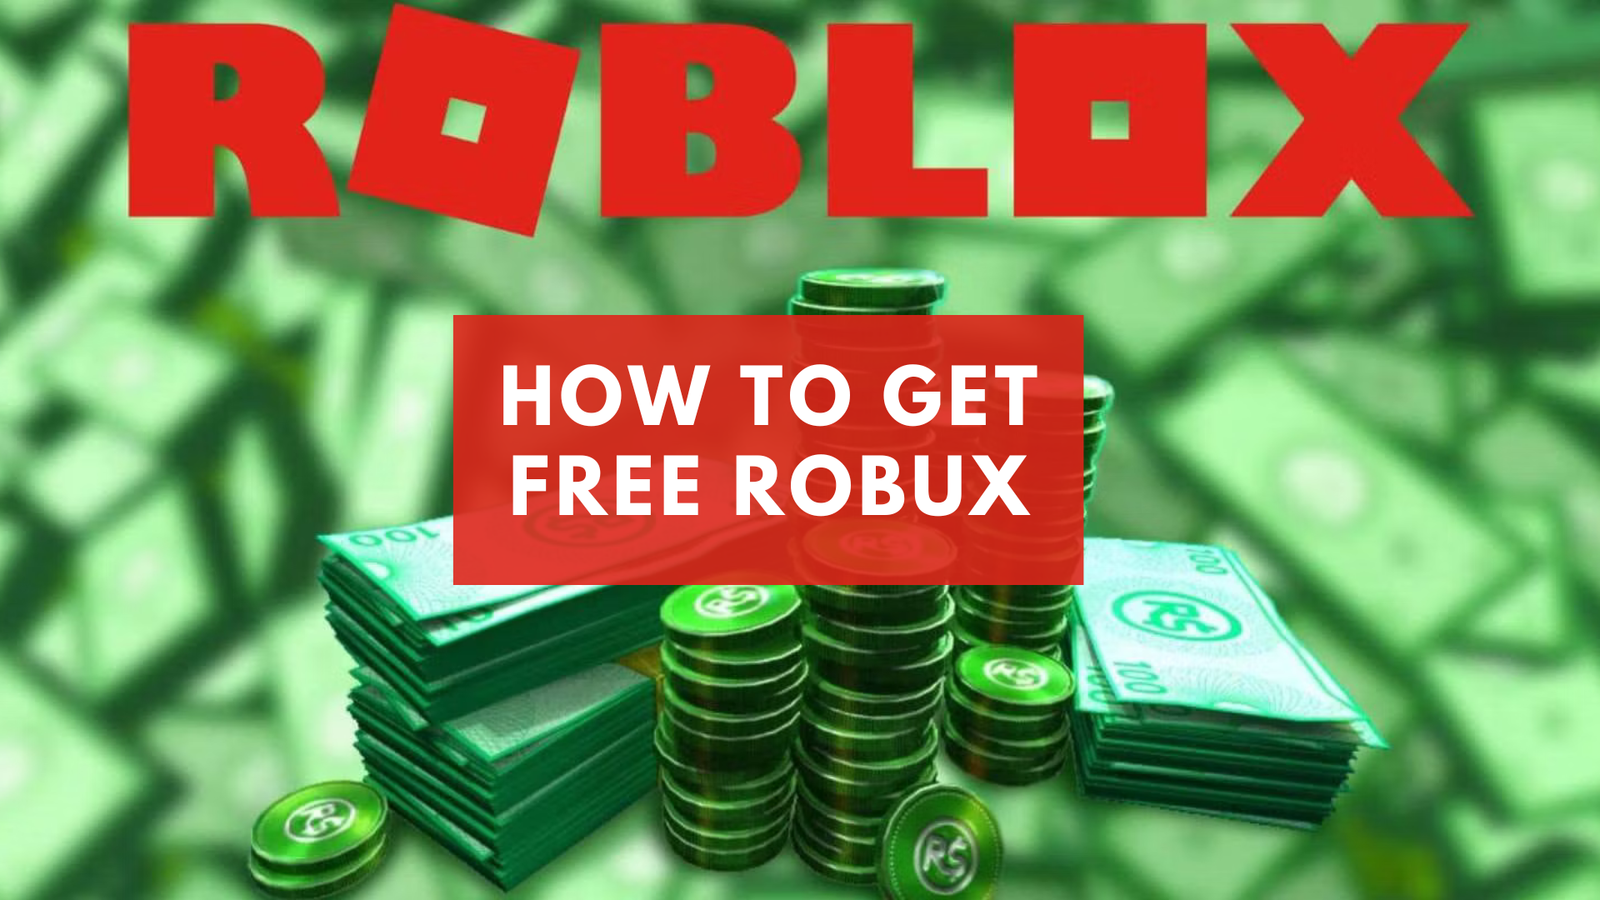 How to Get Free Robux on Roblox?